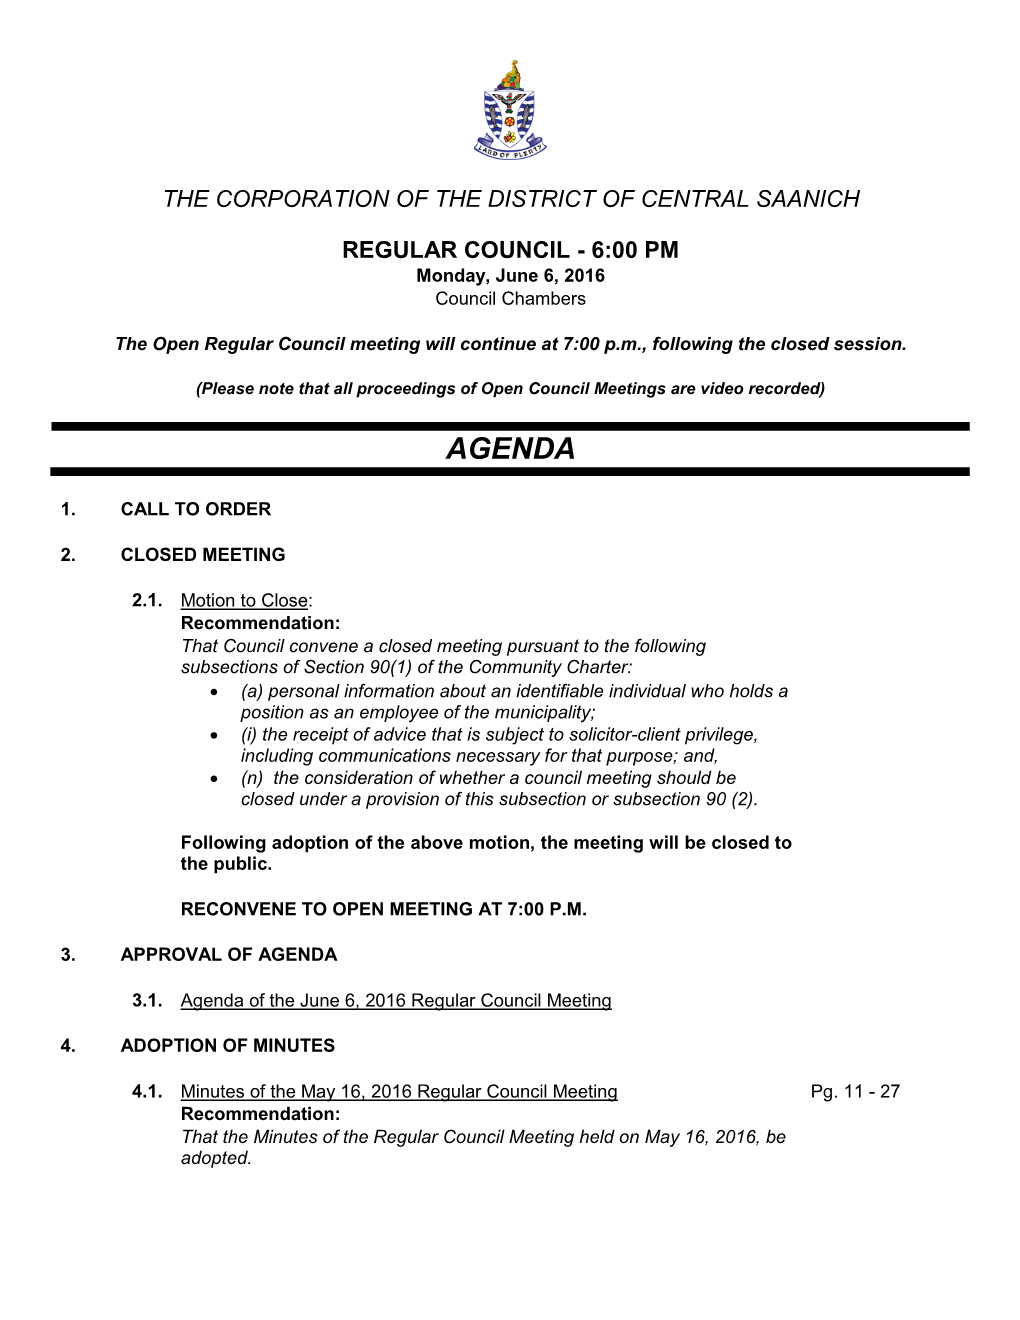 The Corporation of the District of Central Saanich Regular Council